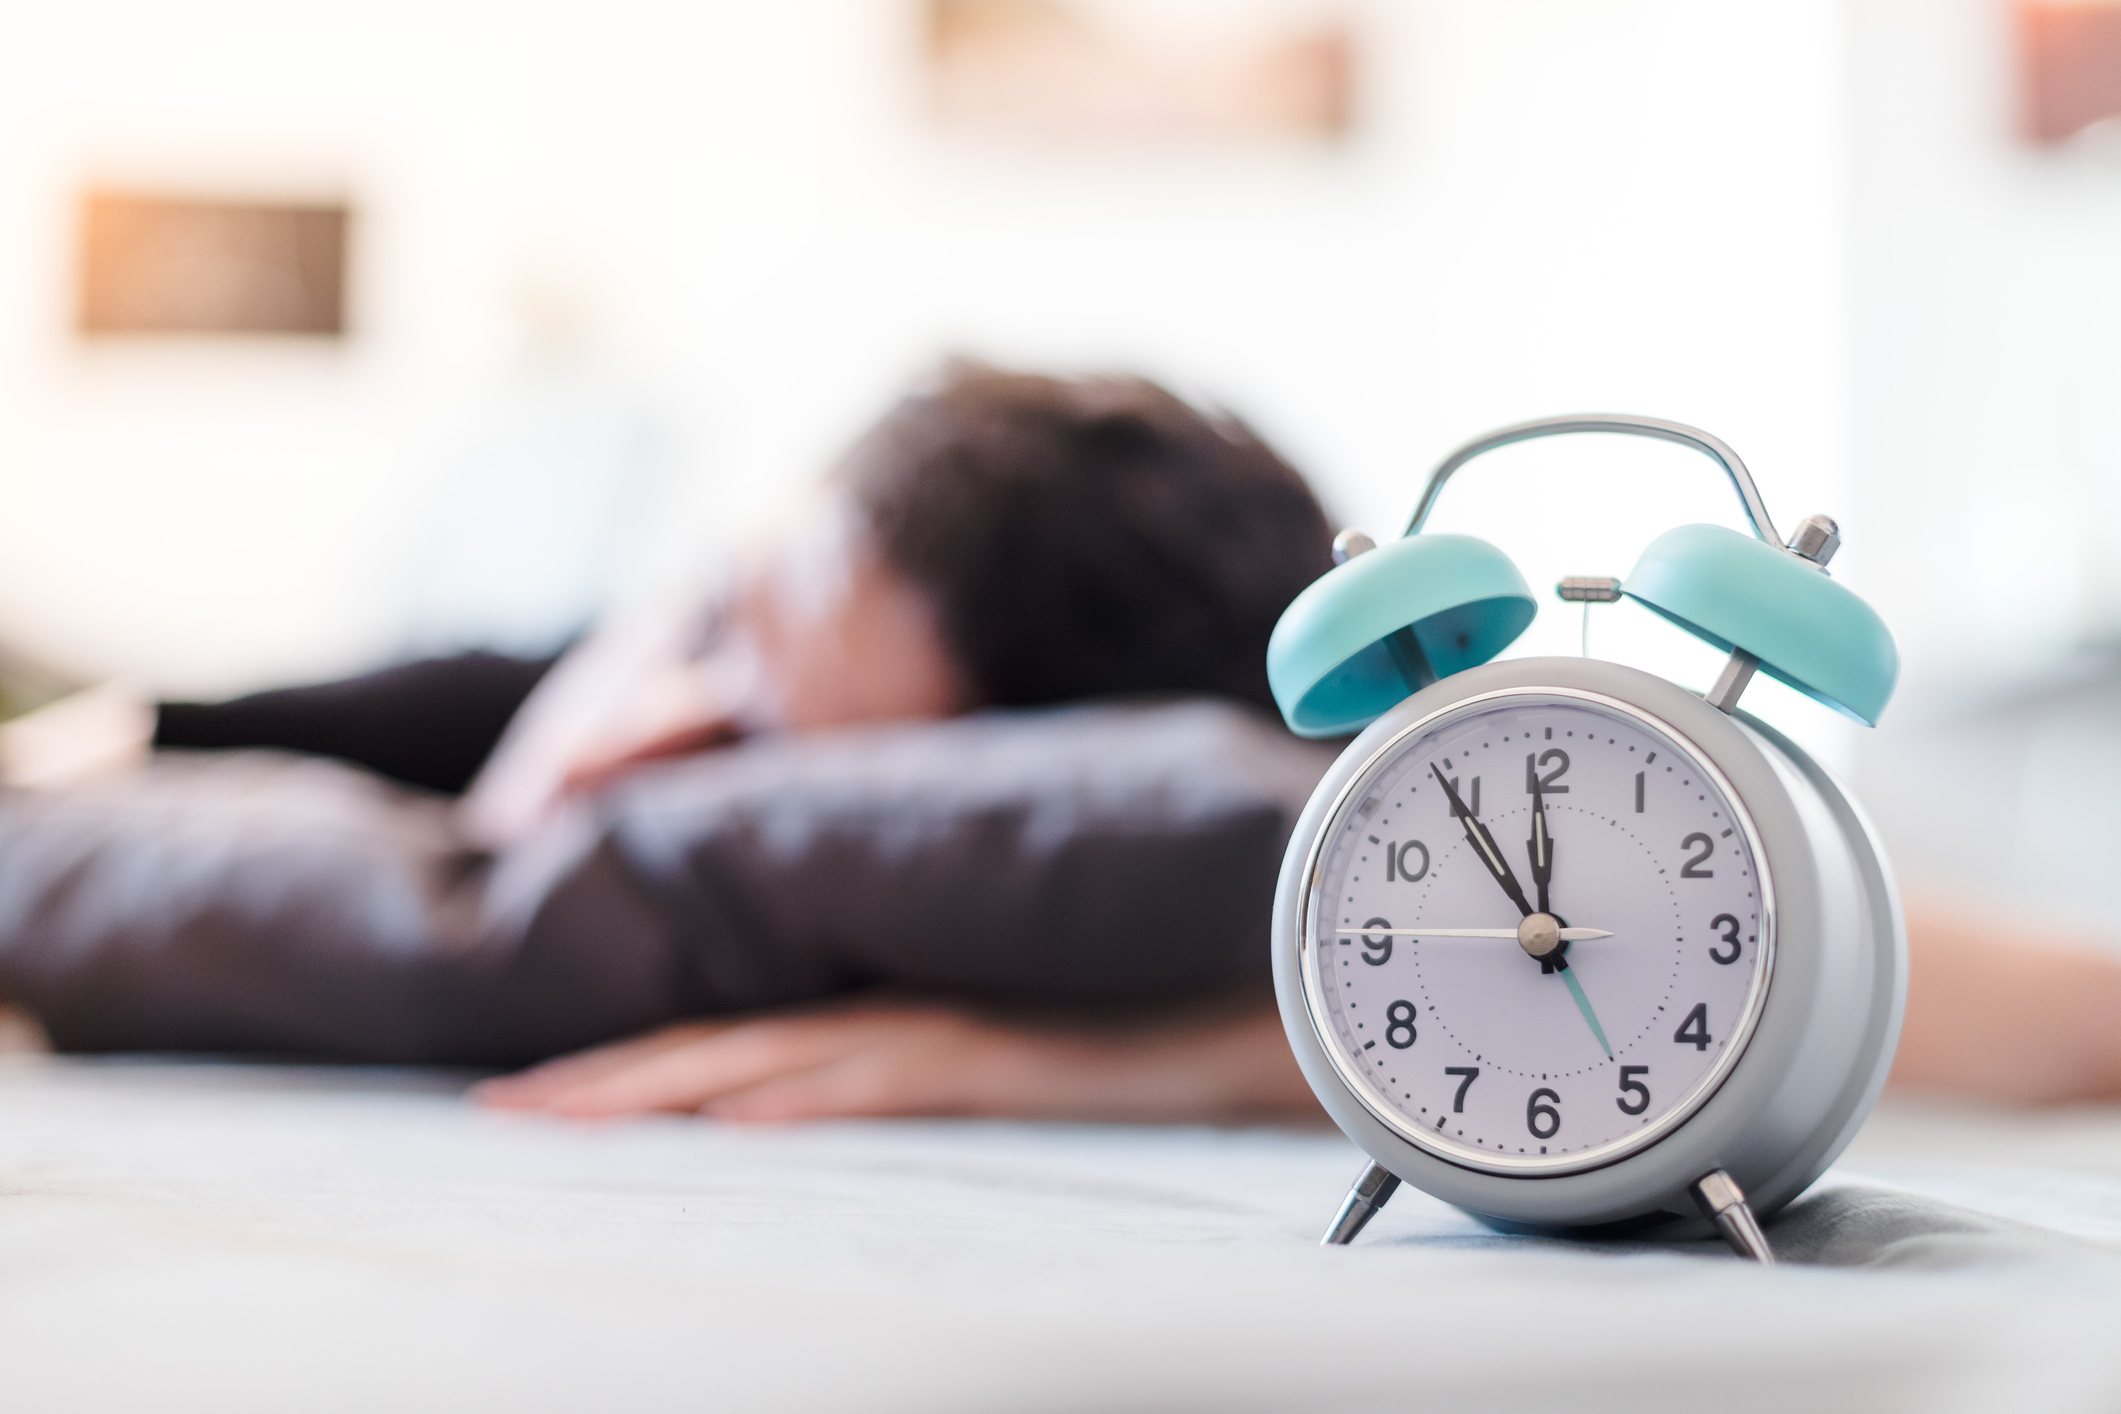 It can be tough on our bodies when we spring forward to daylight saving time. A UC Davis Health sleep expert offers strategies to help you adjust. Man shown sleeping behind the face of an alarm clock.